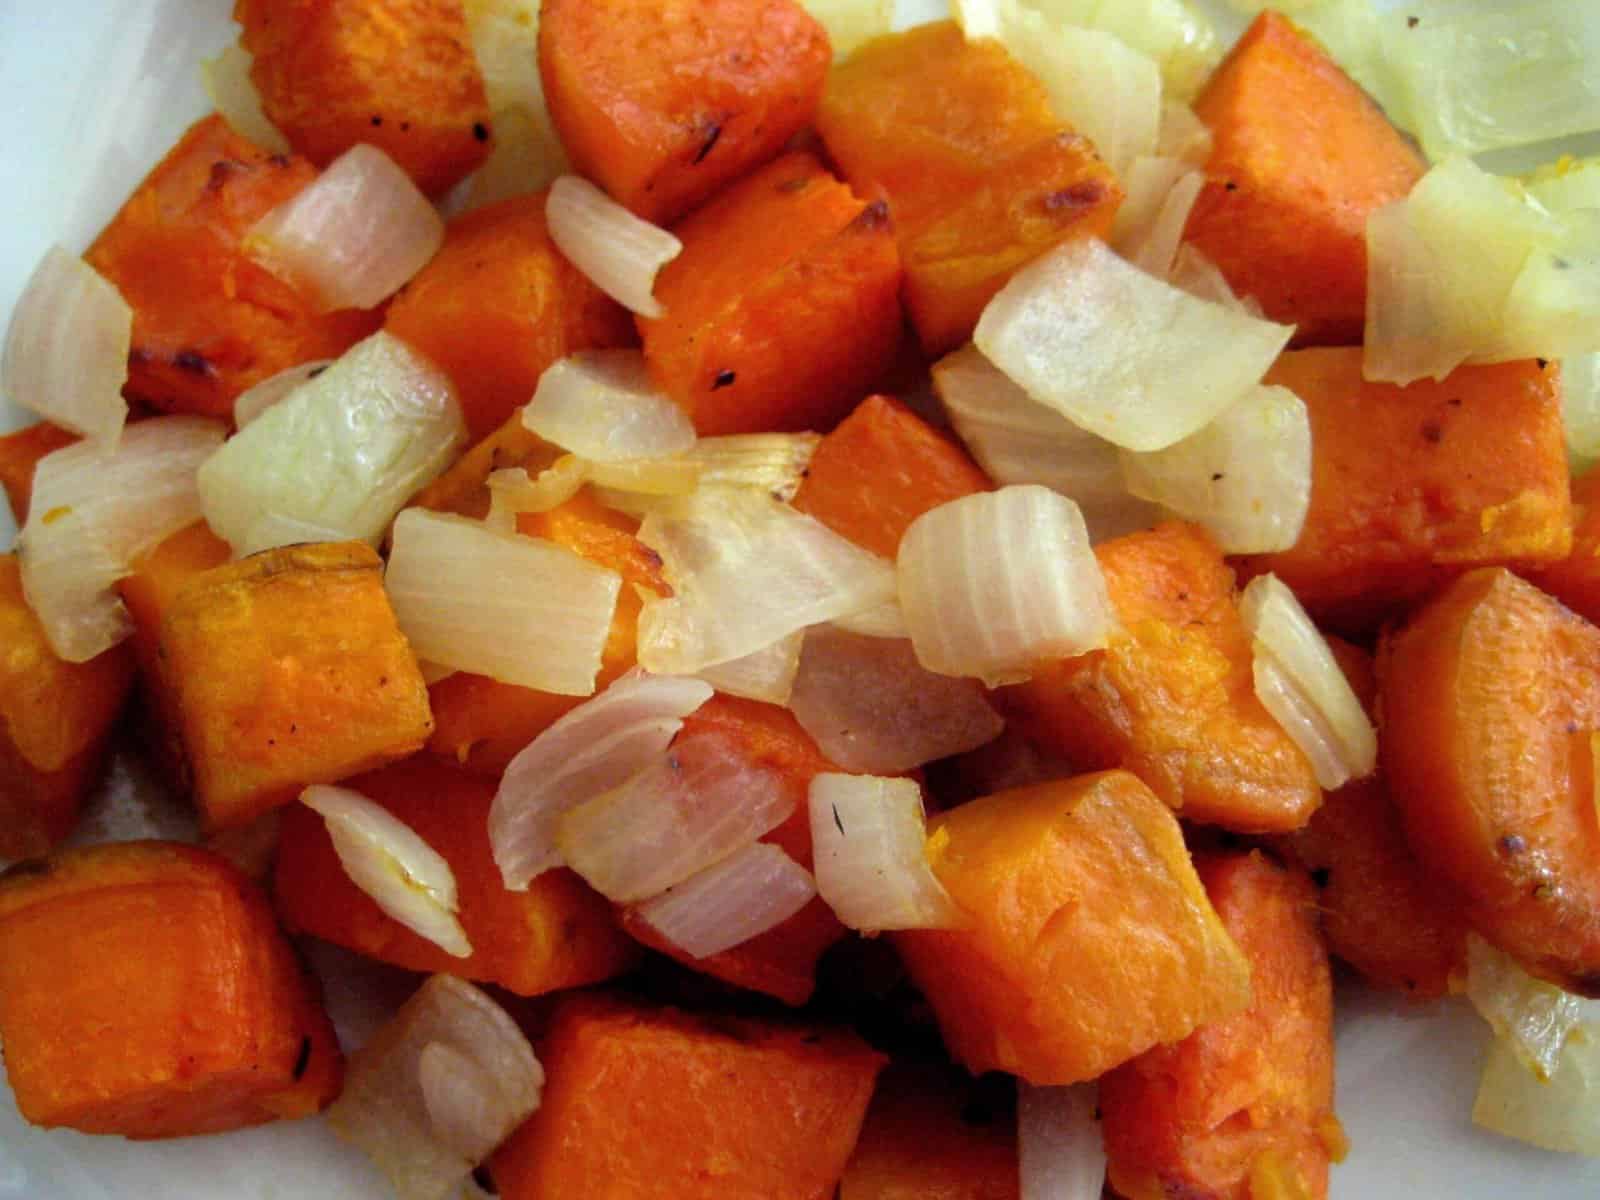  Add a pop of color to your plate with these vibrant sweet potatoes